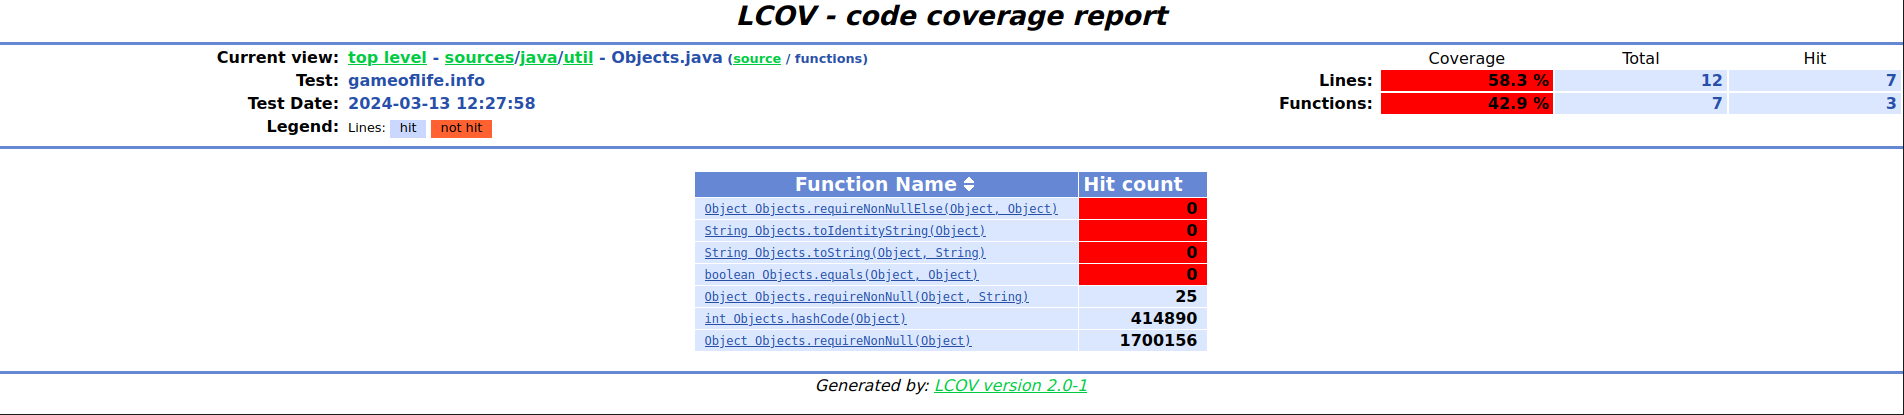 LCOV Genhtml Report - Functions View